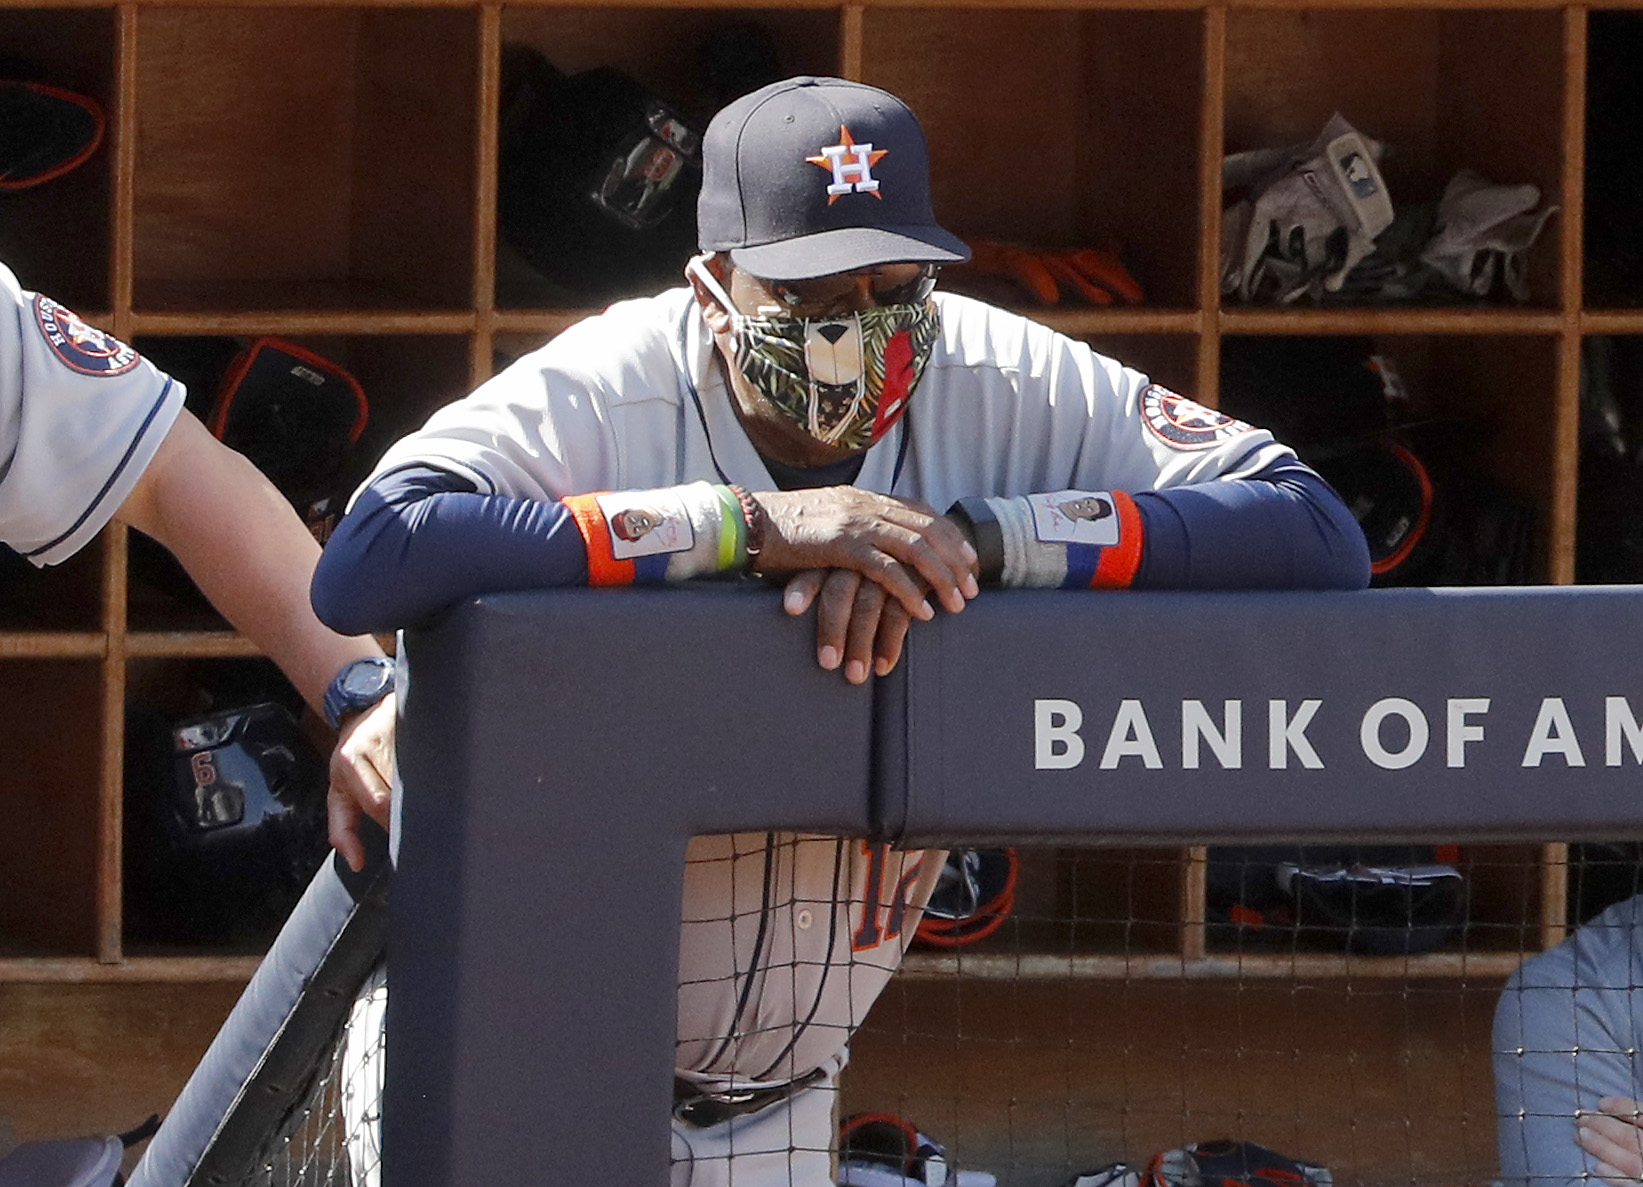 Dusty Baker is manager of the Astros.